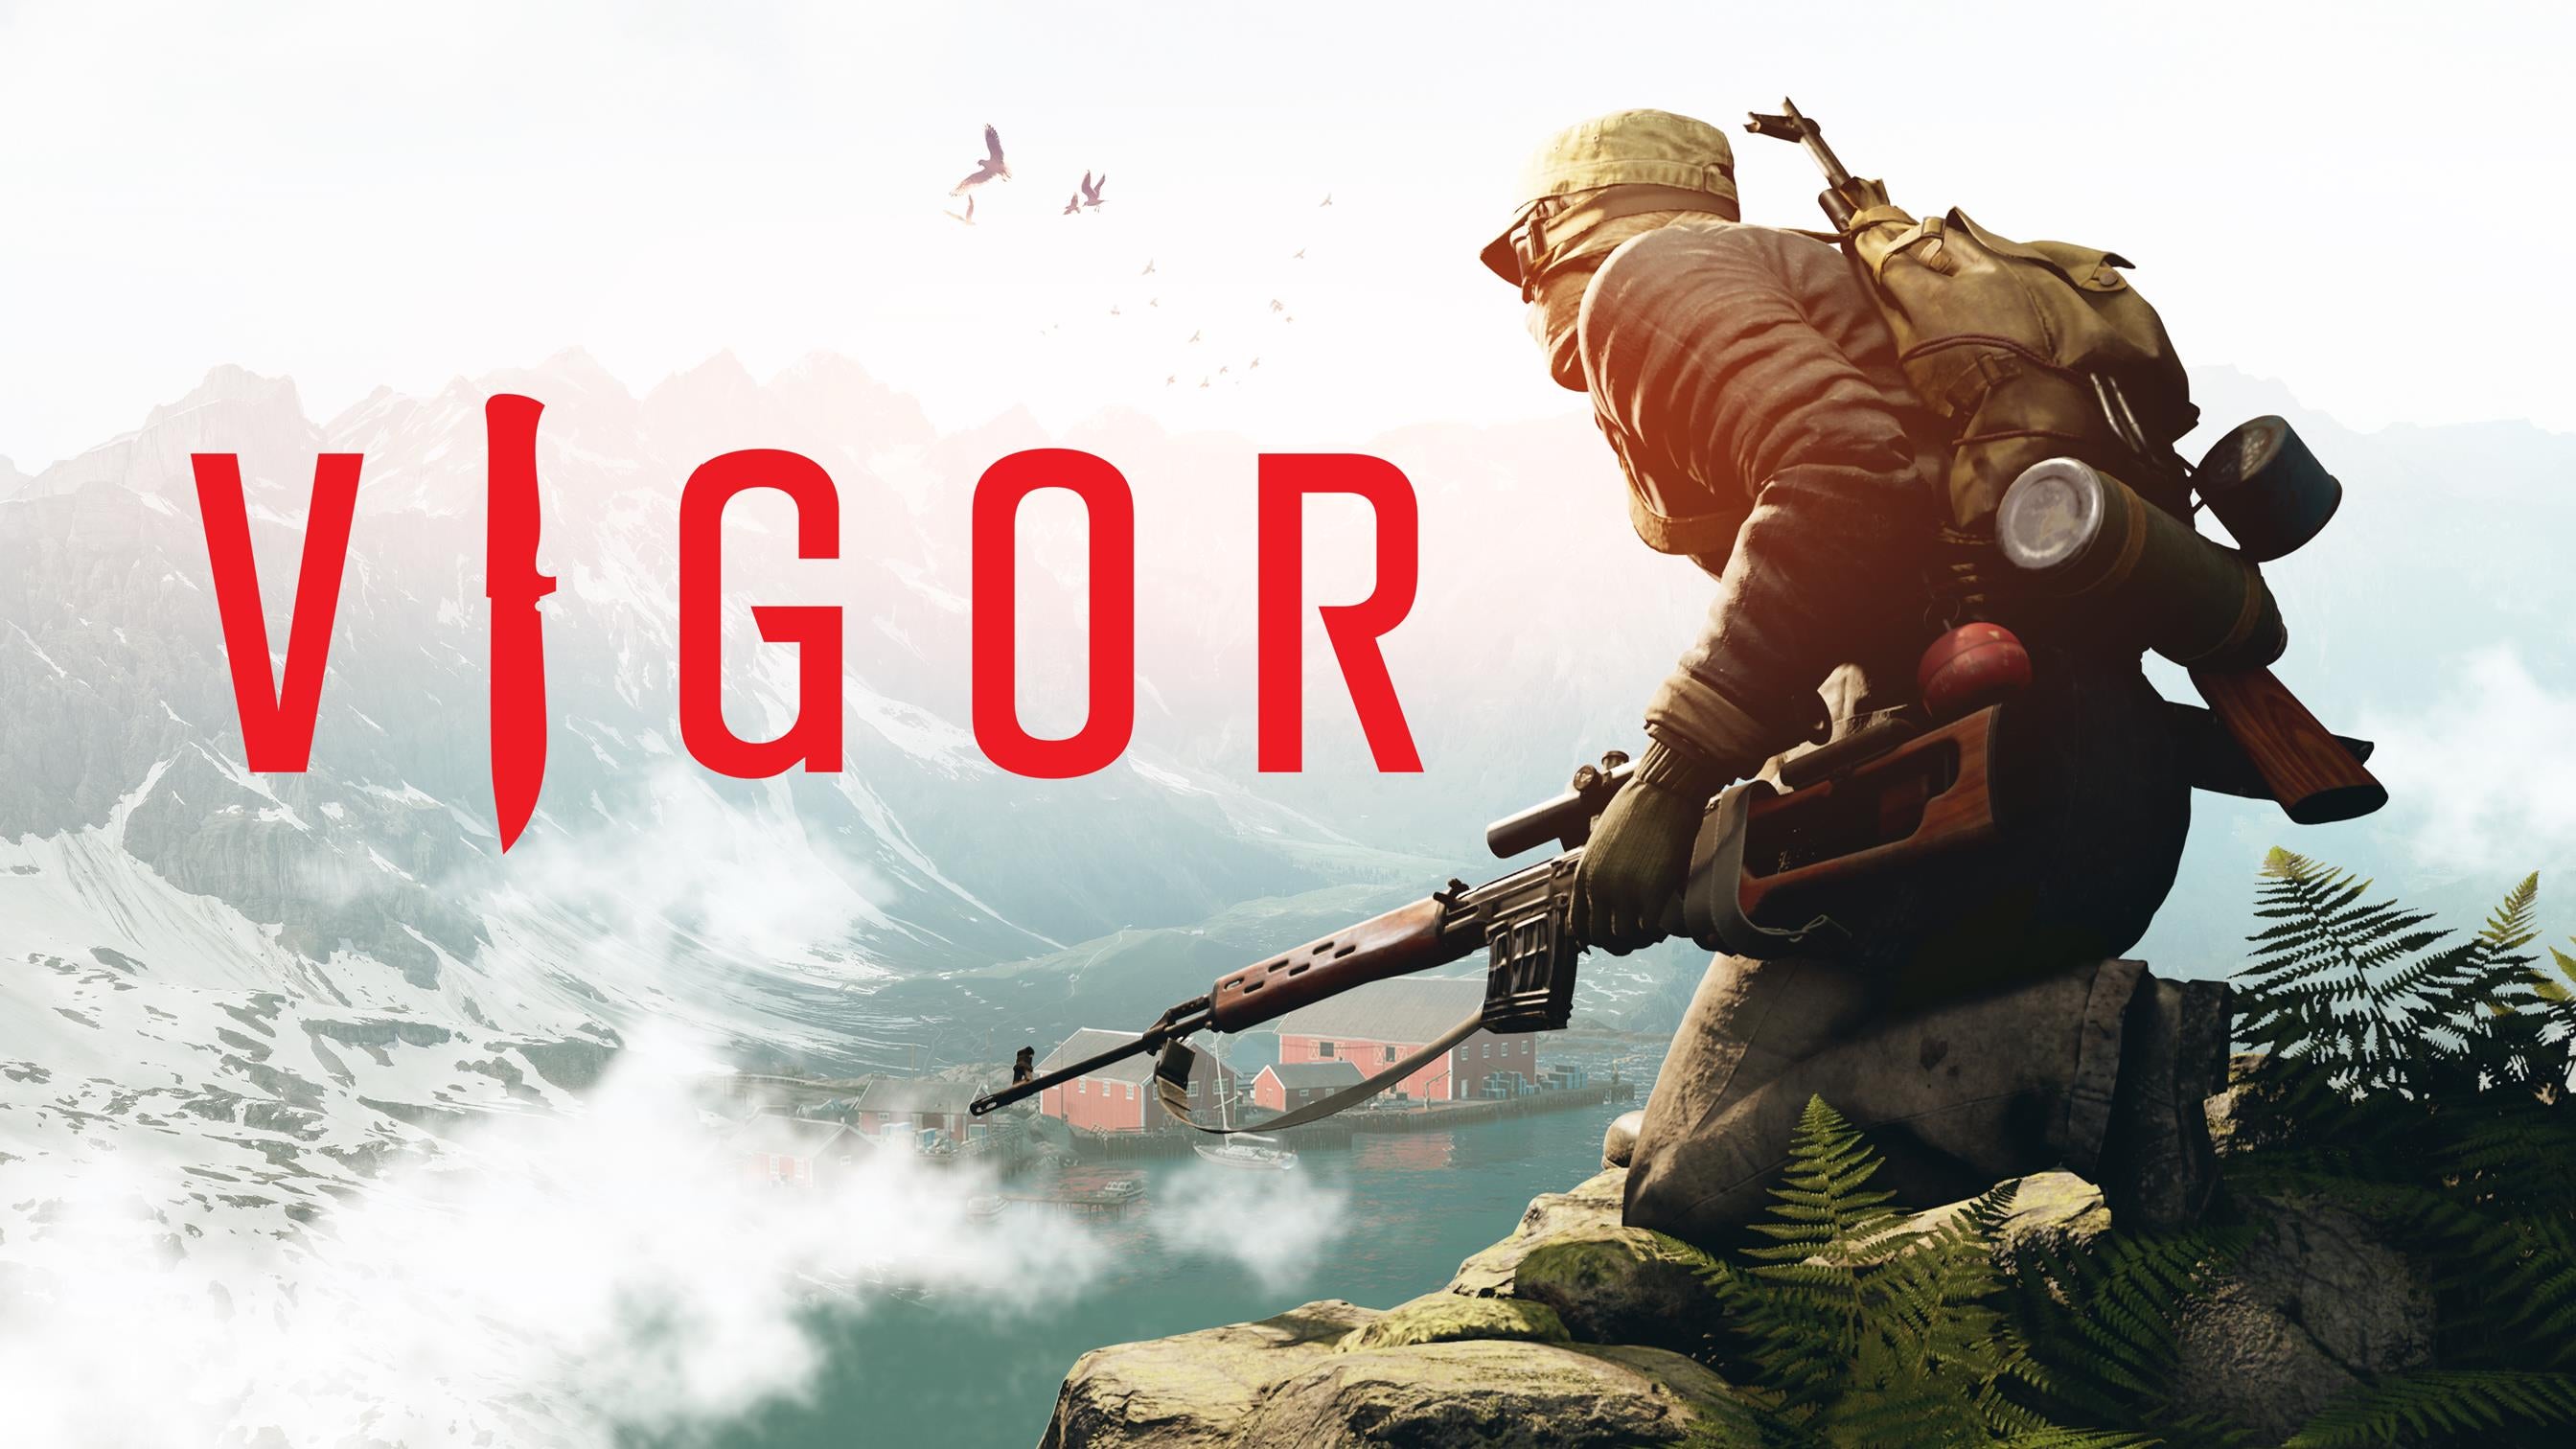 Image for E3 2018: Vigor is the new survival game from DayZ developer Bohemia